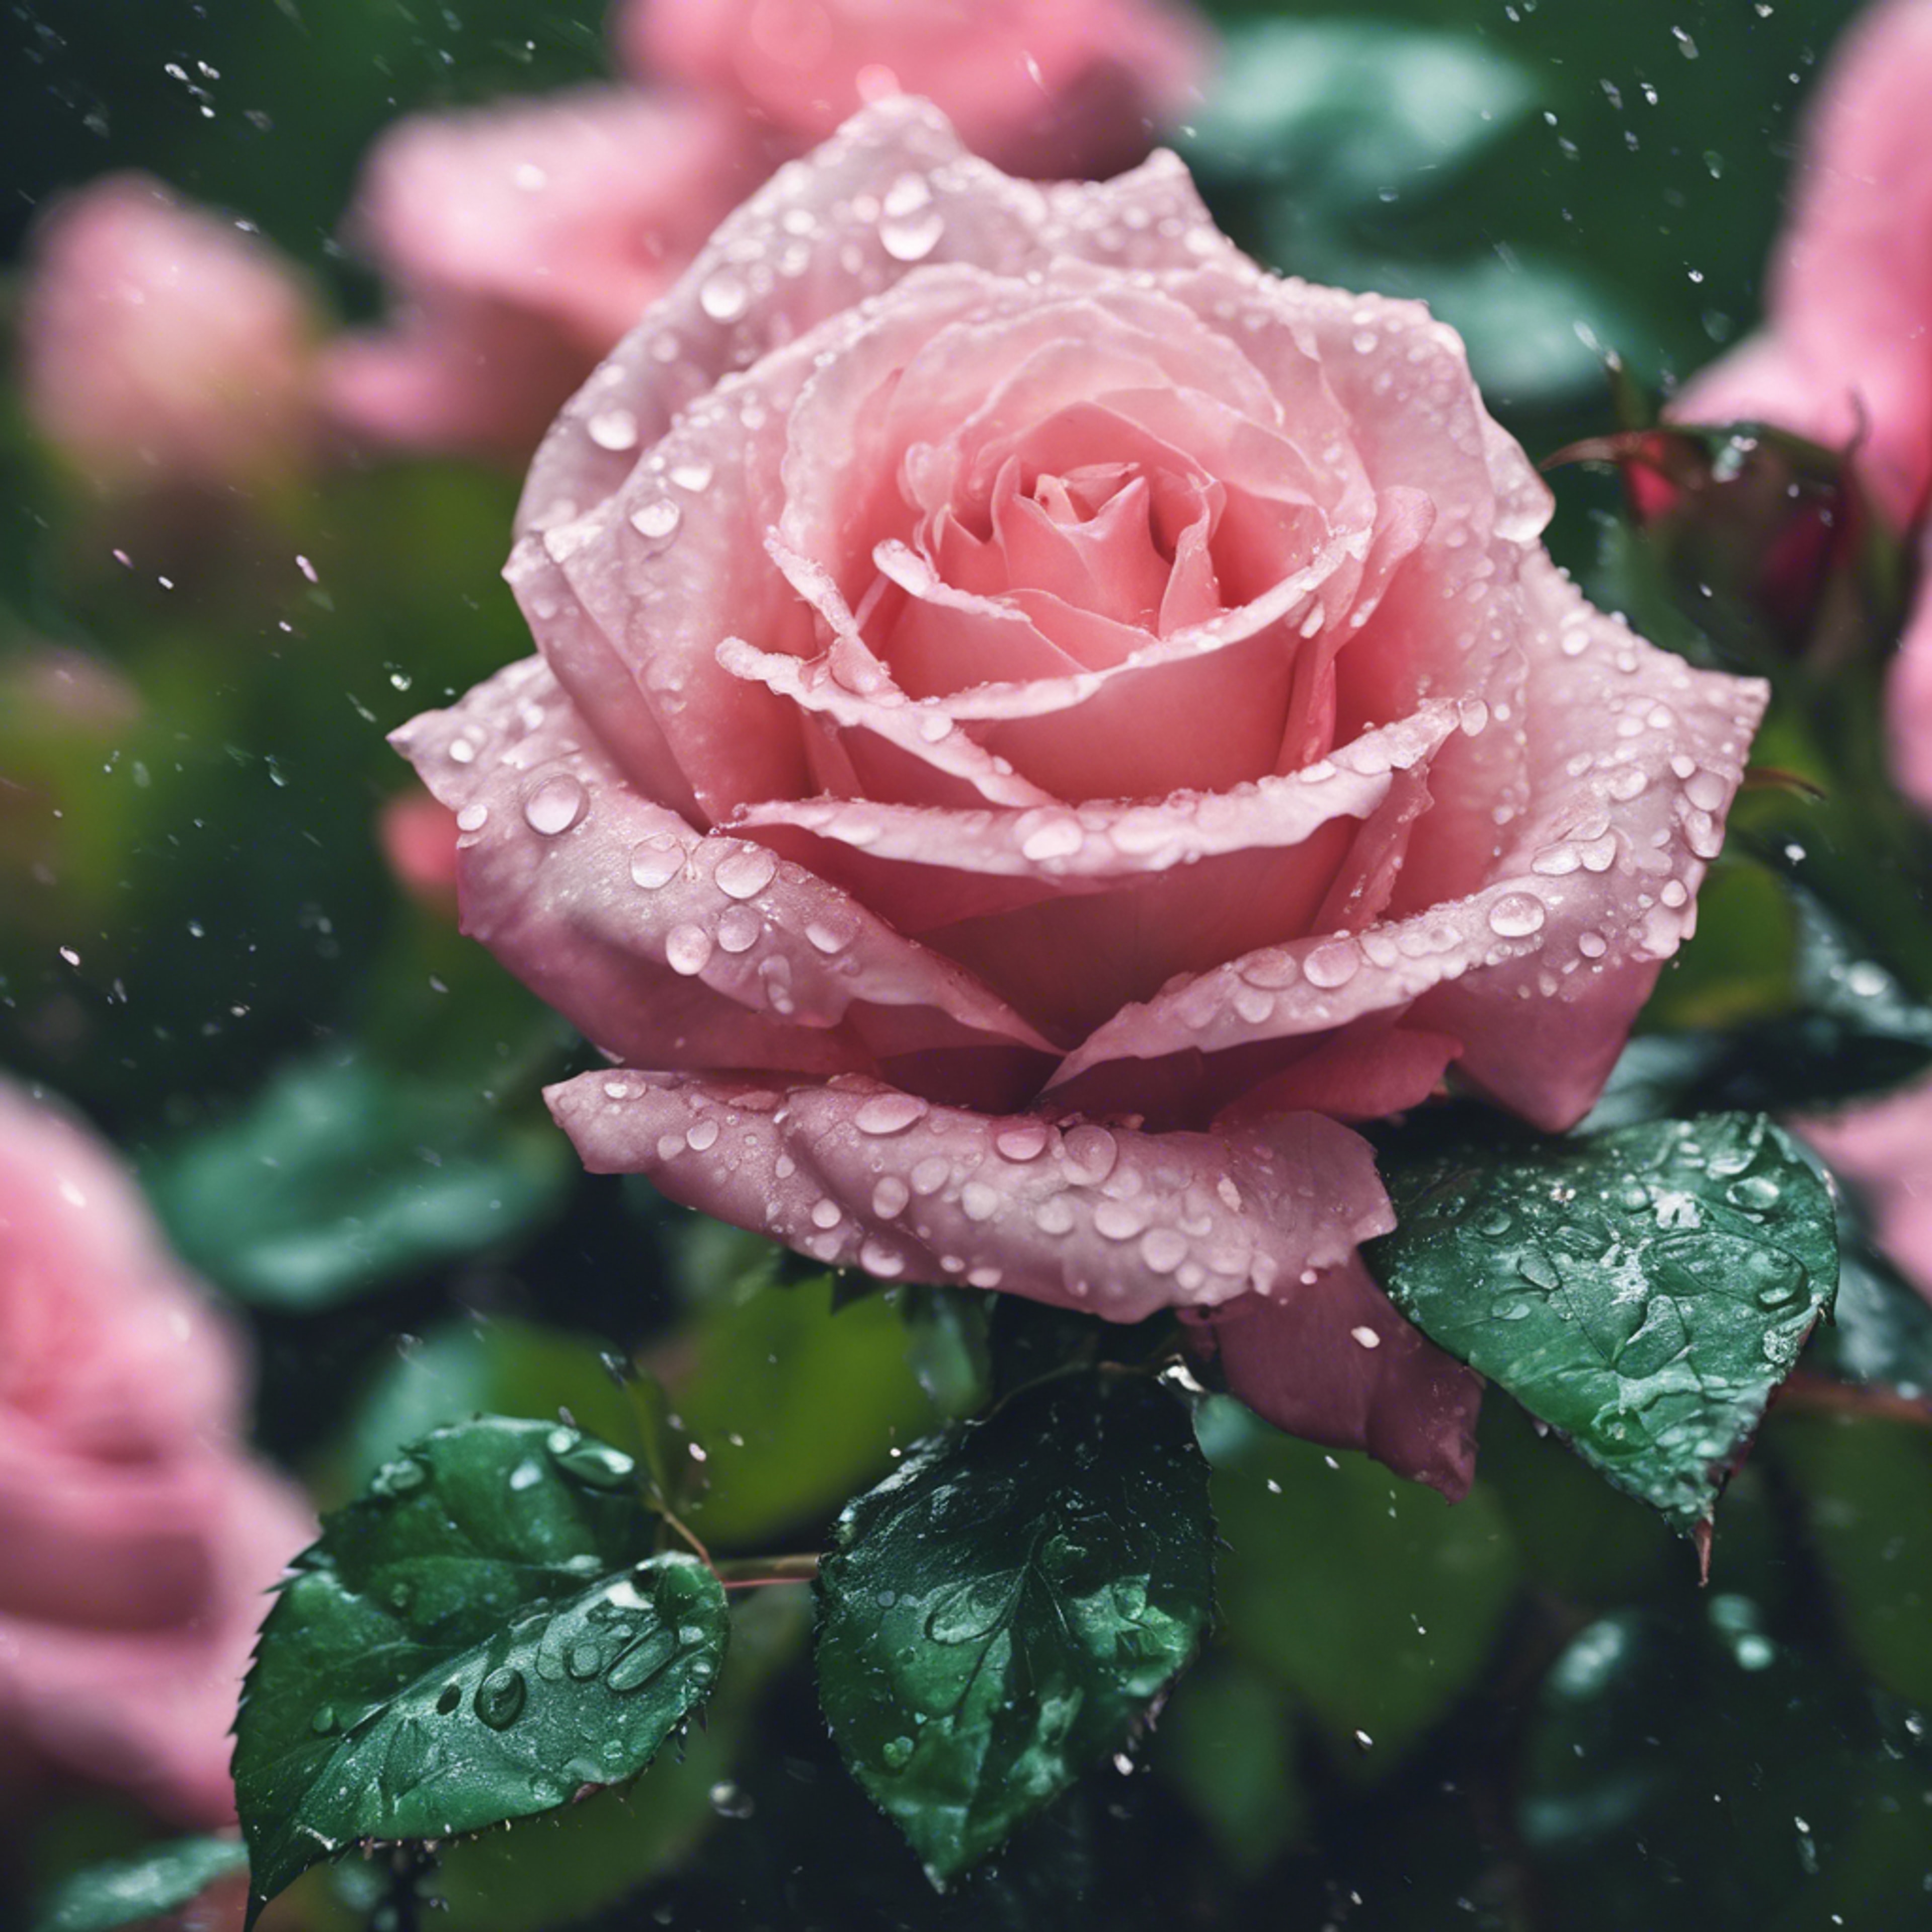 Gentle rain falling on the bright green leaves and pink roses. Tapet[2479f95970de45b492b9]